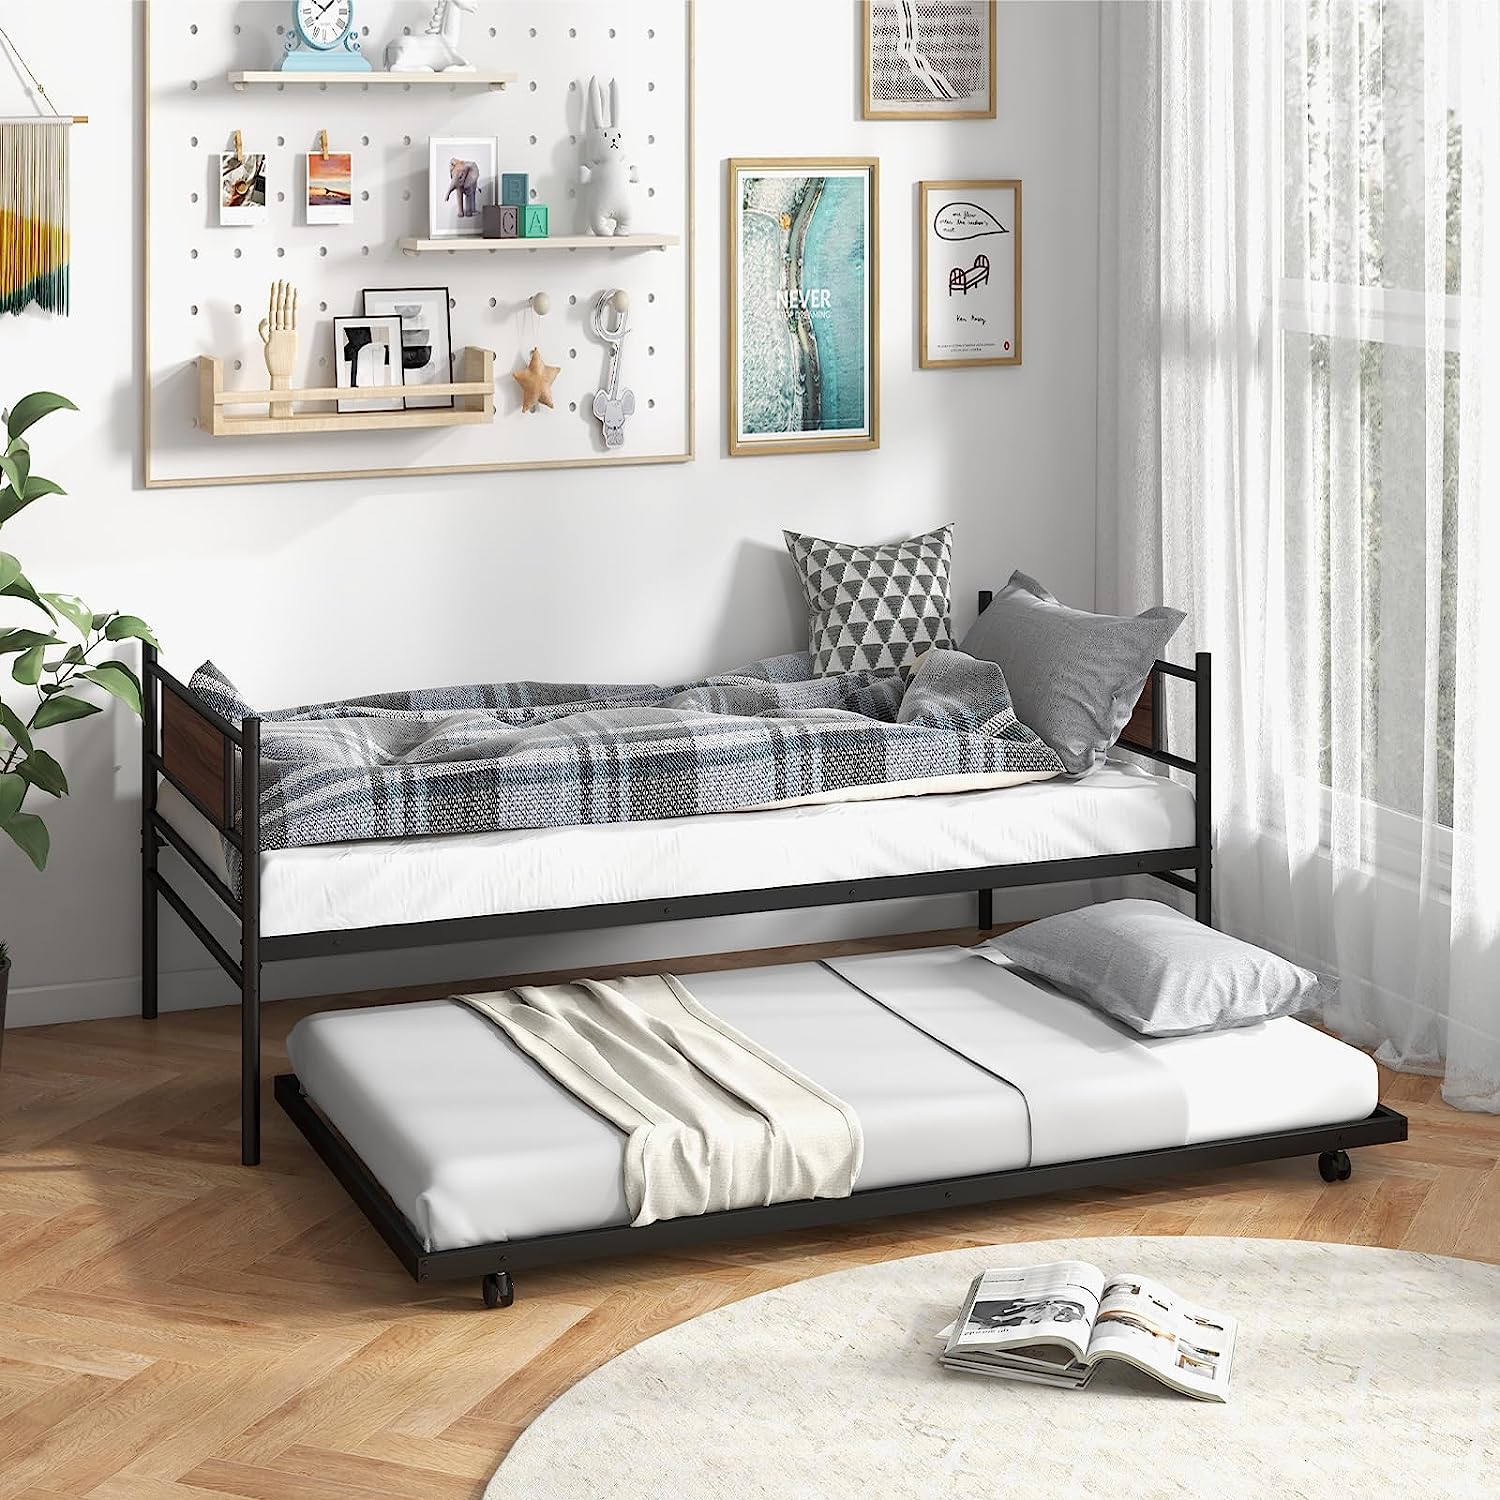 Giantex Metal Daybed with Trundle, Twin Size Day Bed [...]